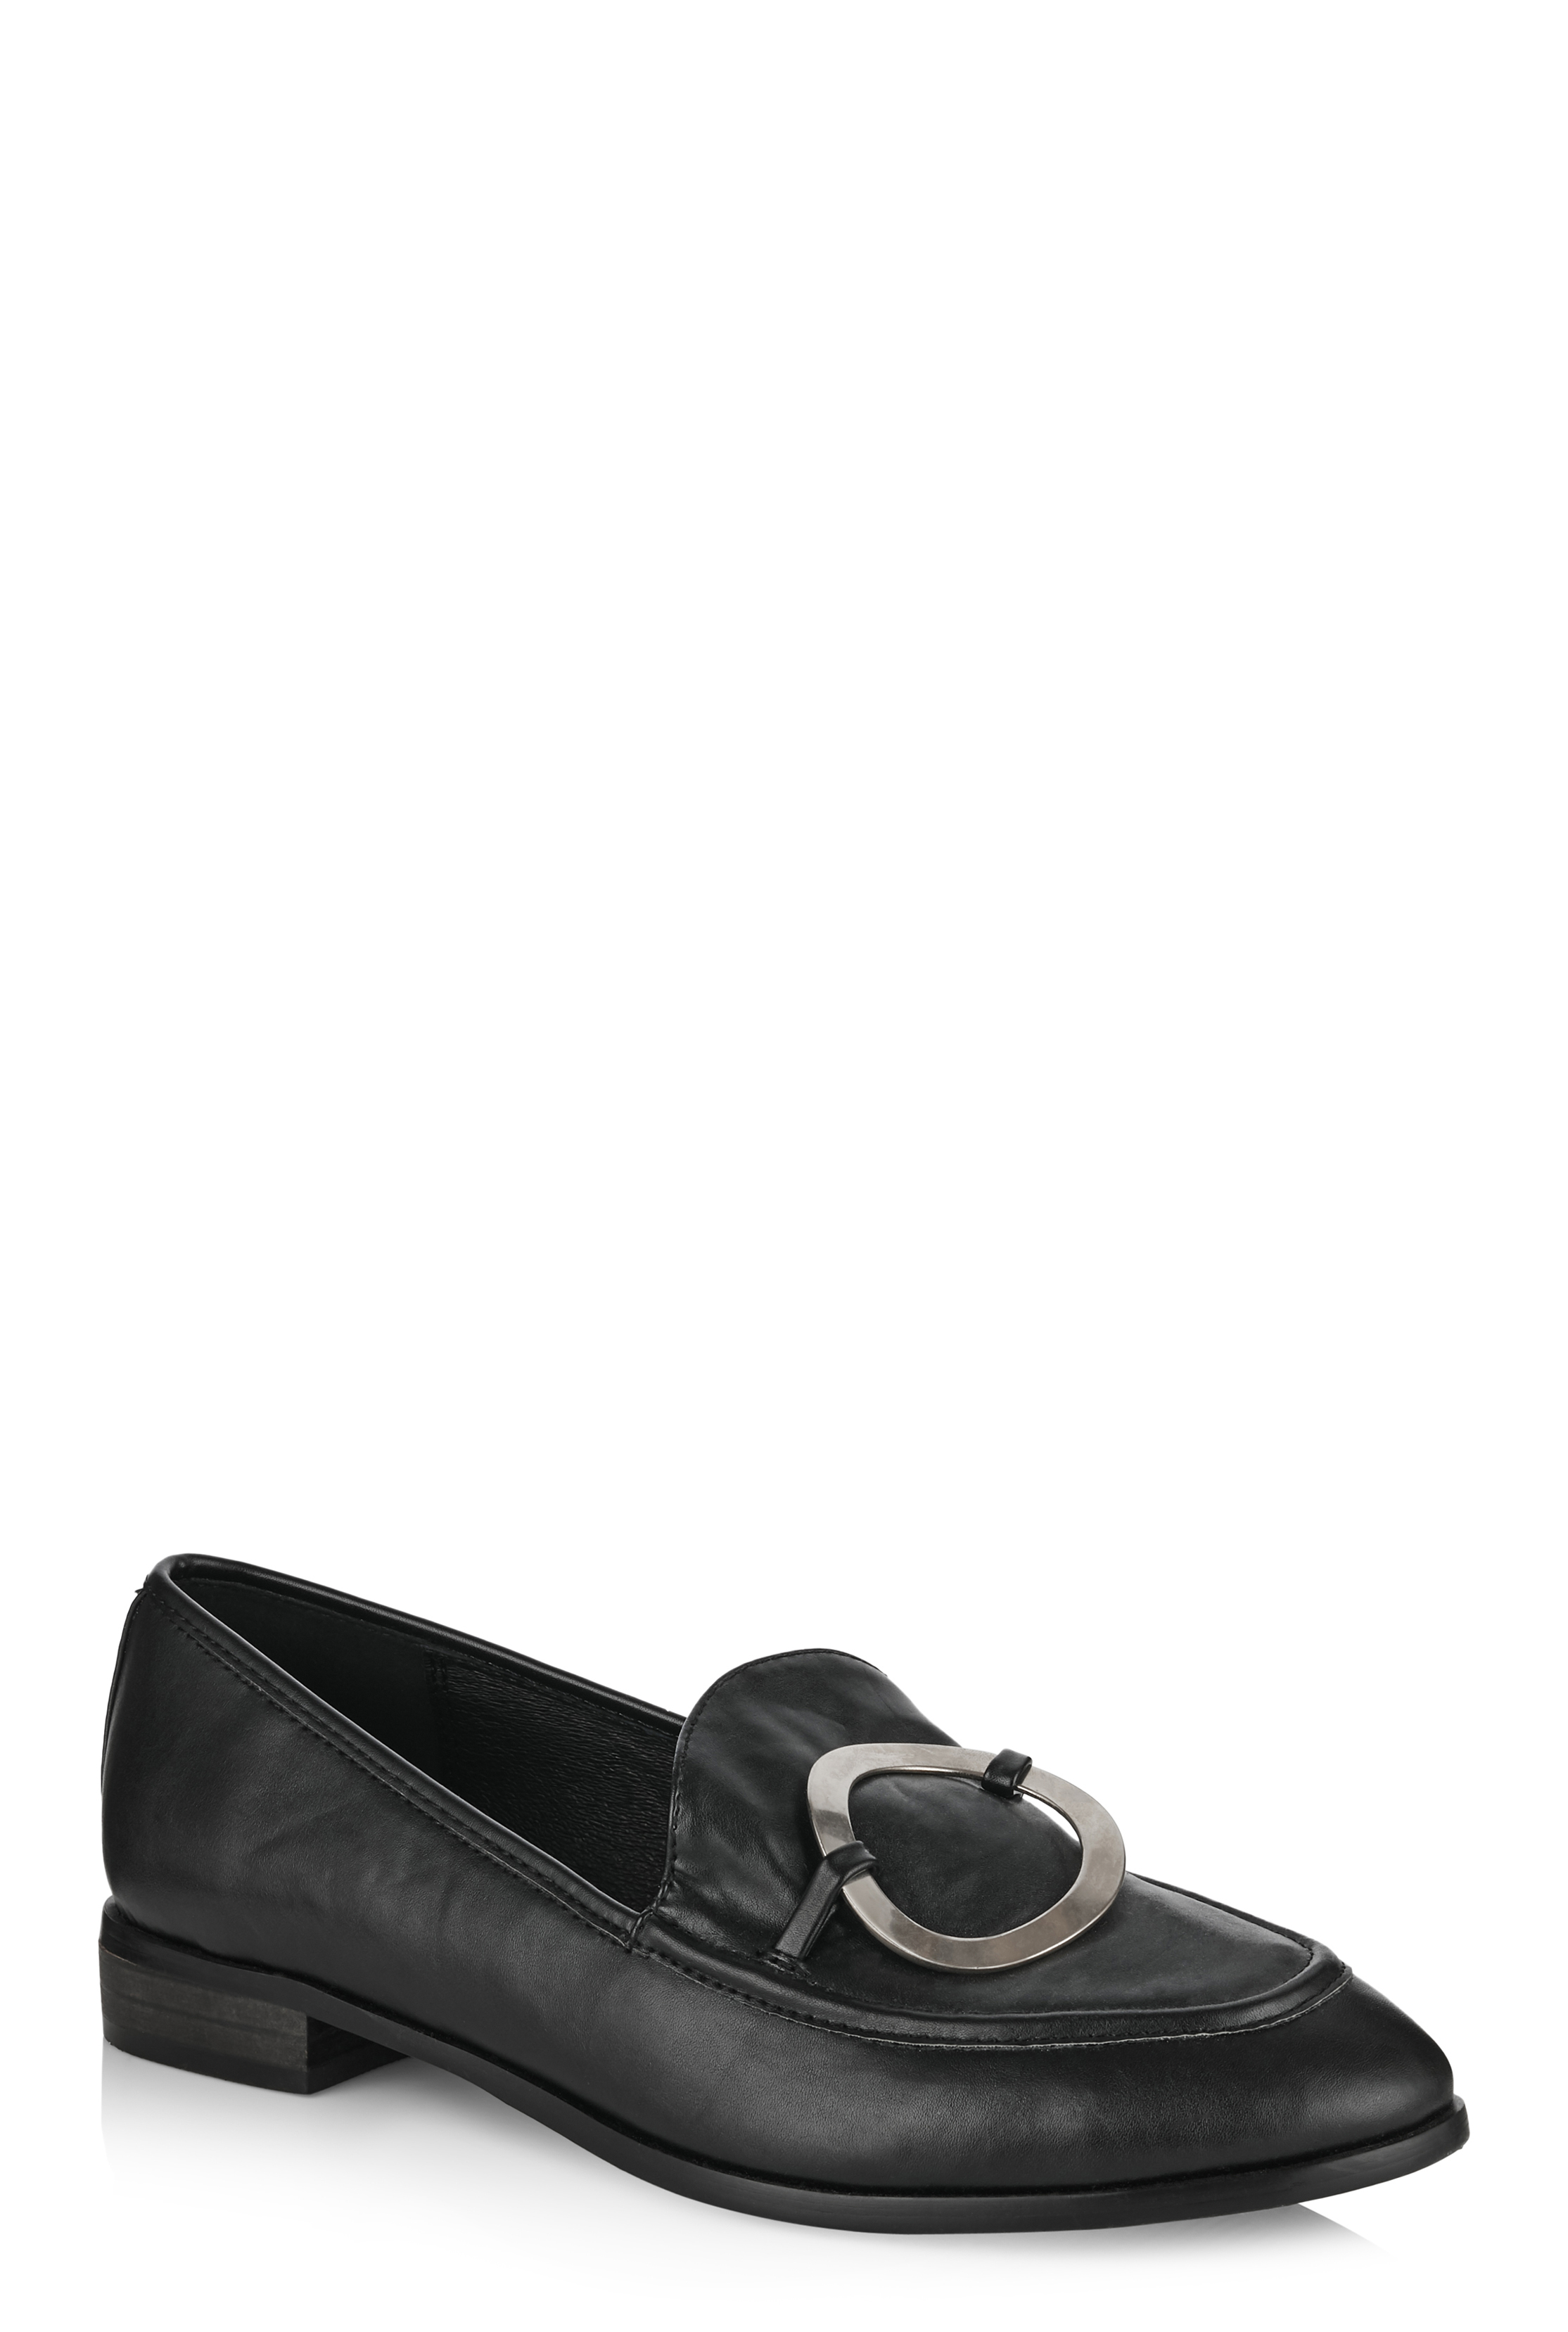 LTS Aubrey O-Ring Loafer | Long Tall Sally